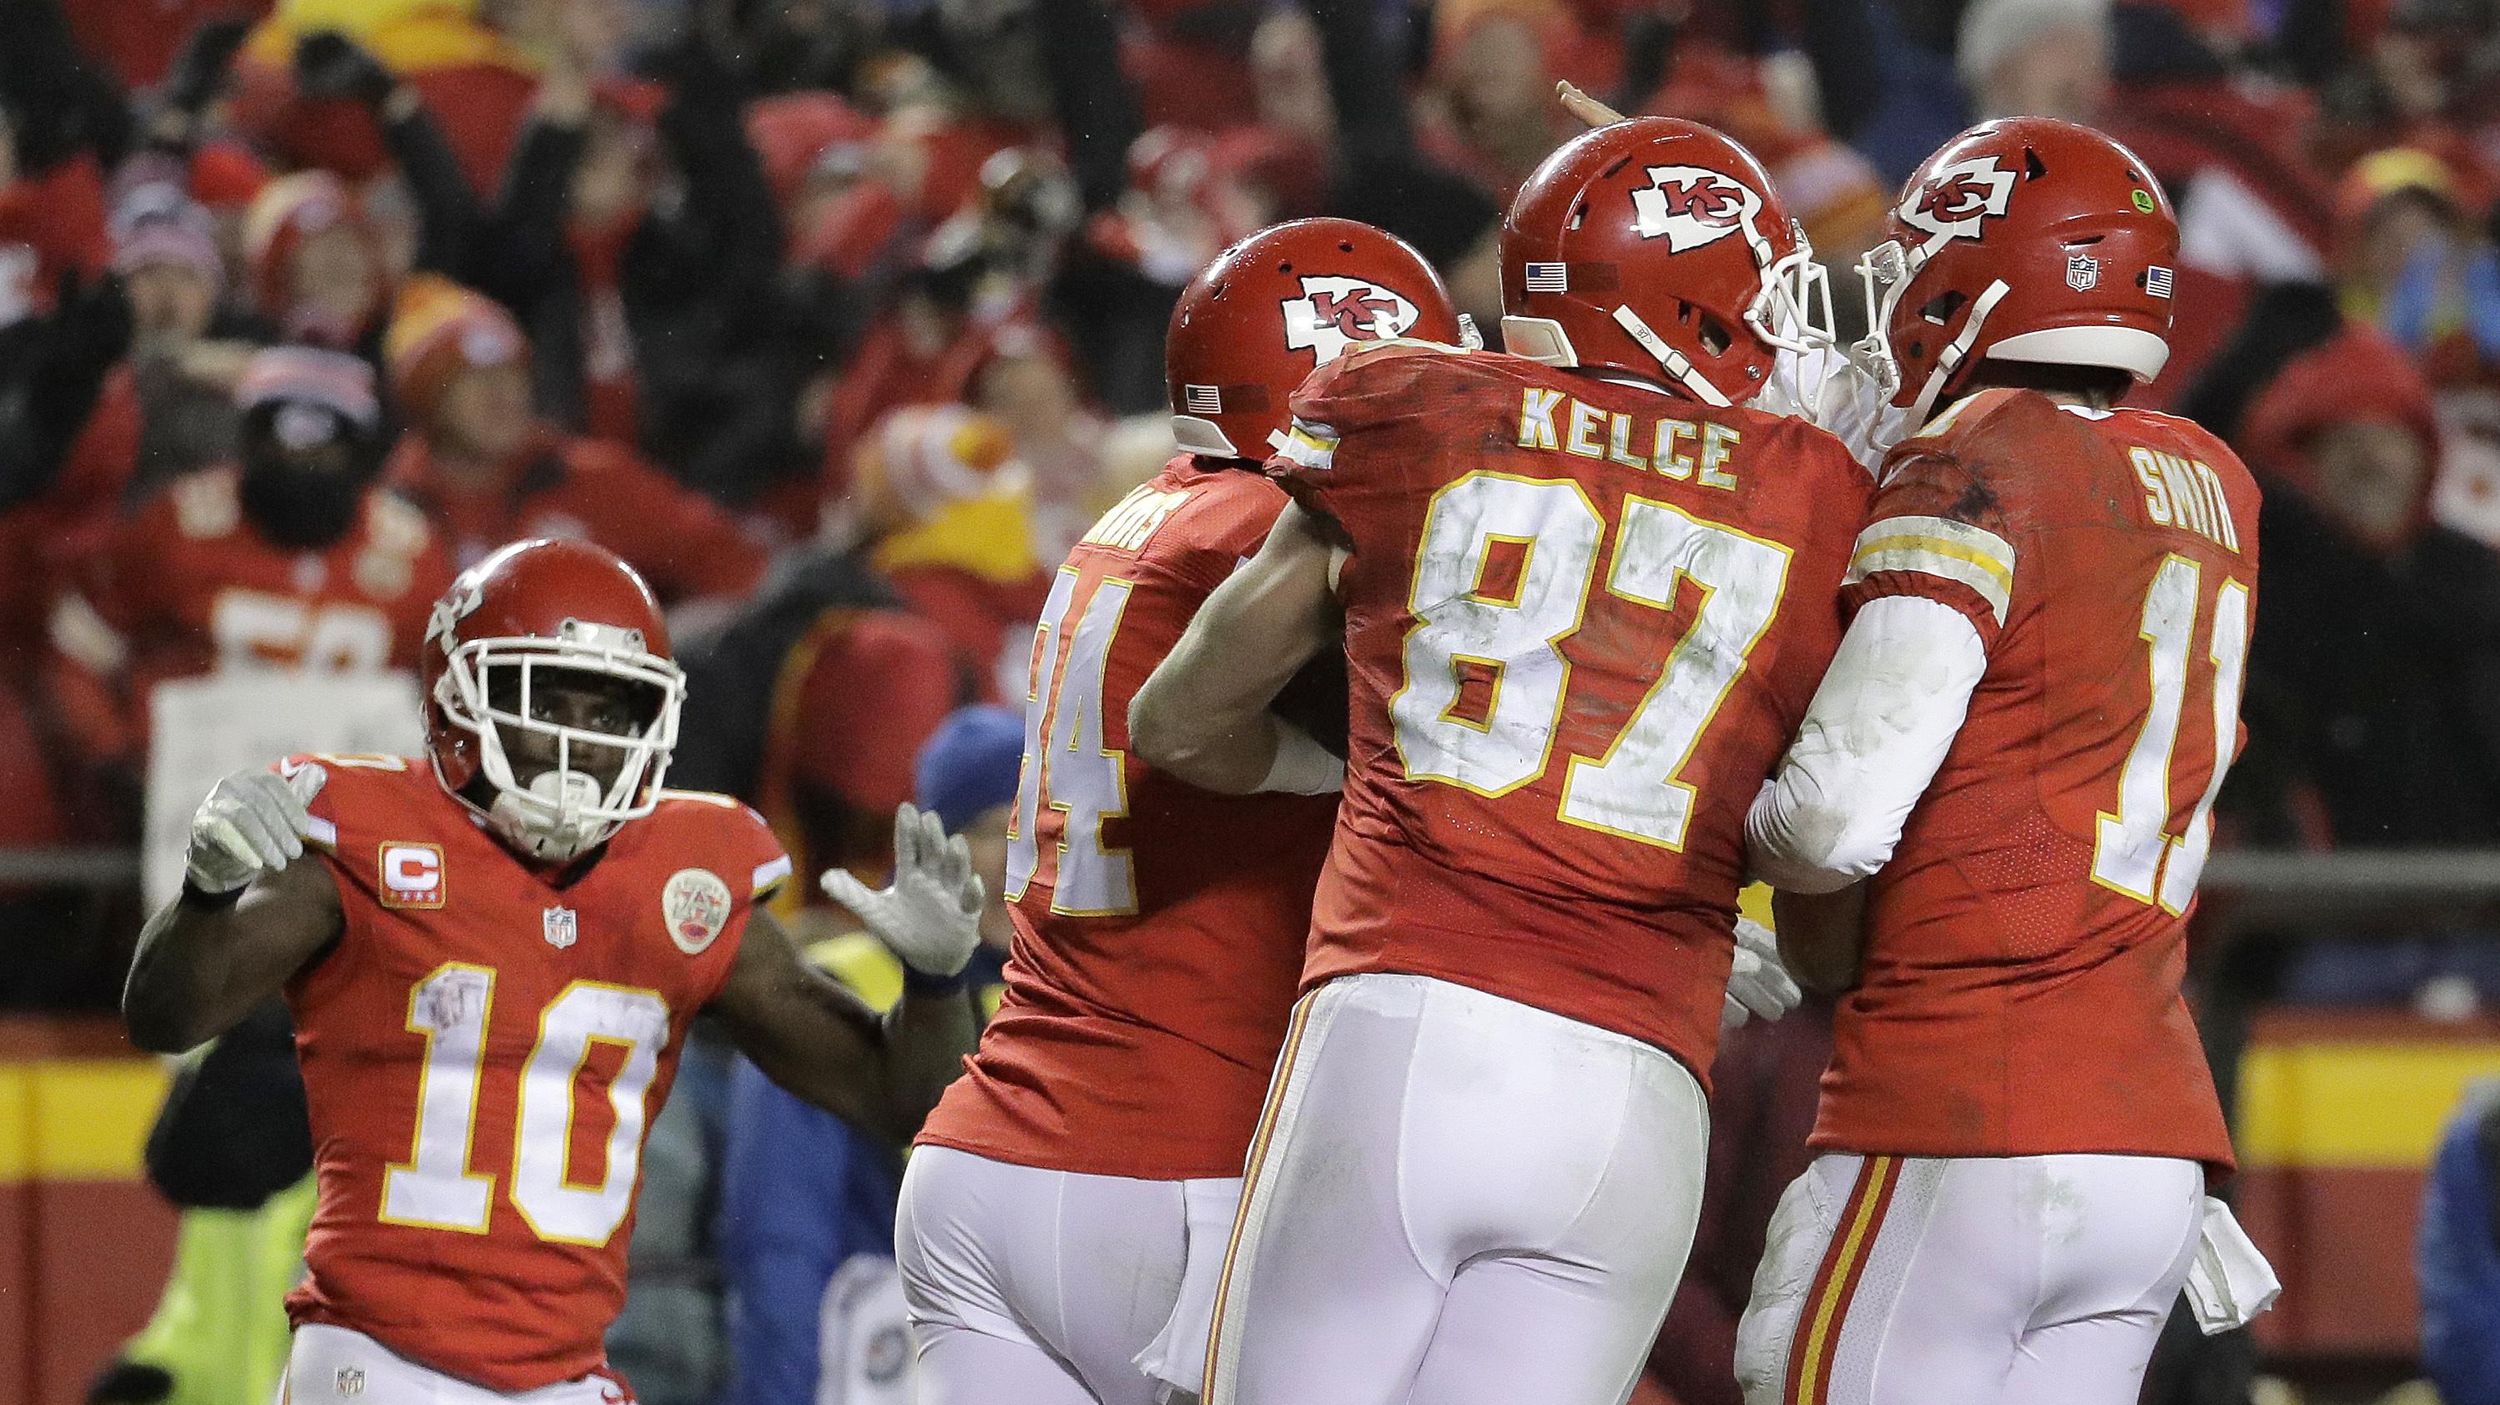 Chiefs' Andy Reid believes holding should have been no-call